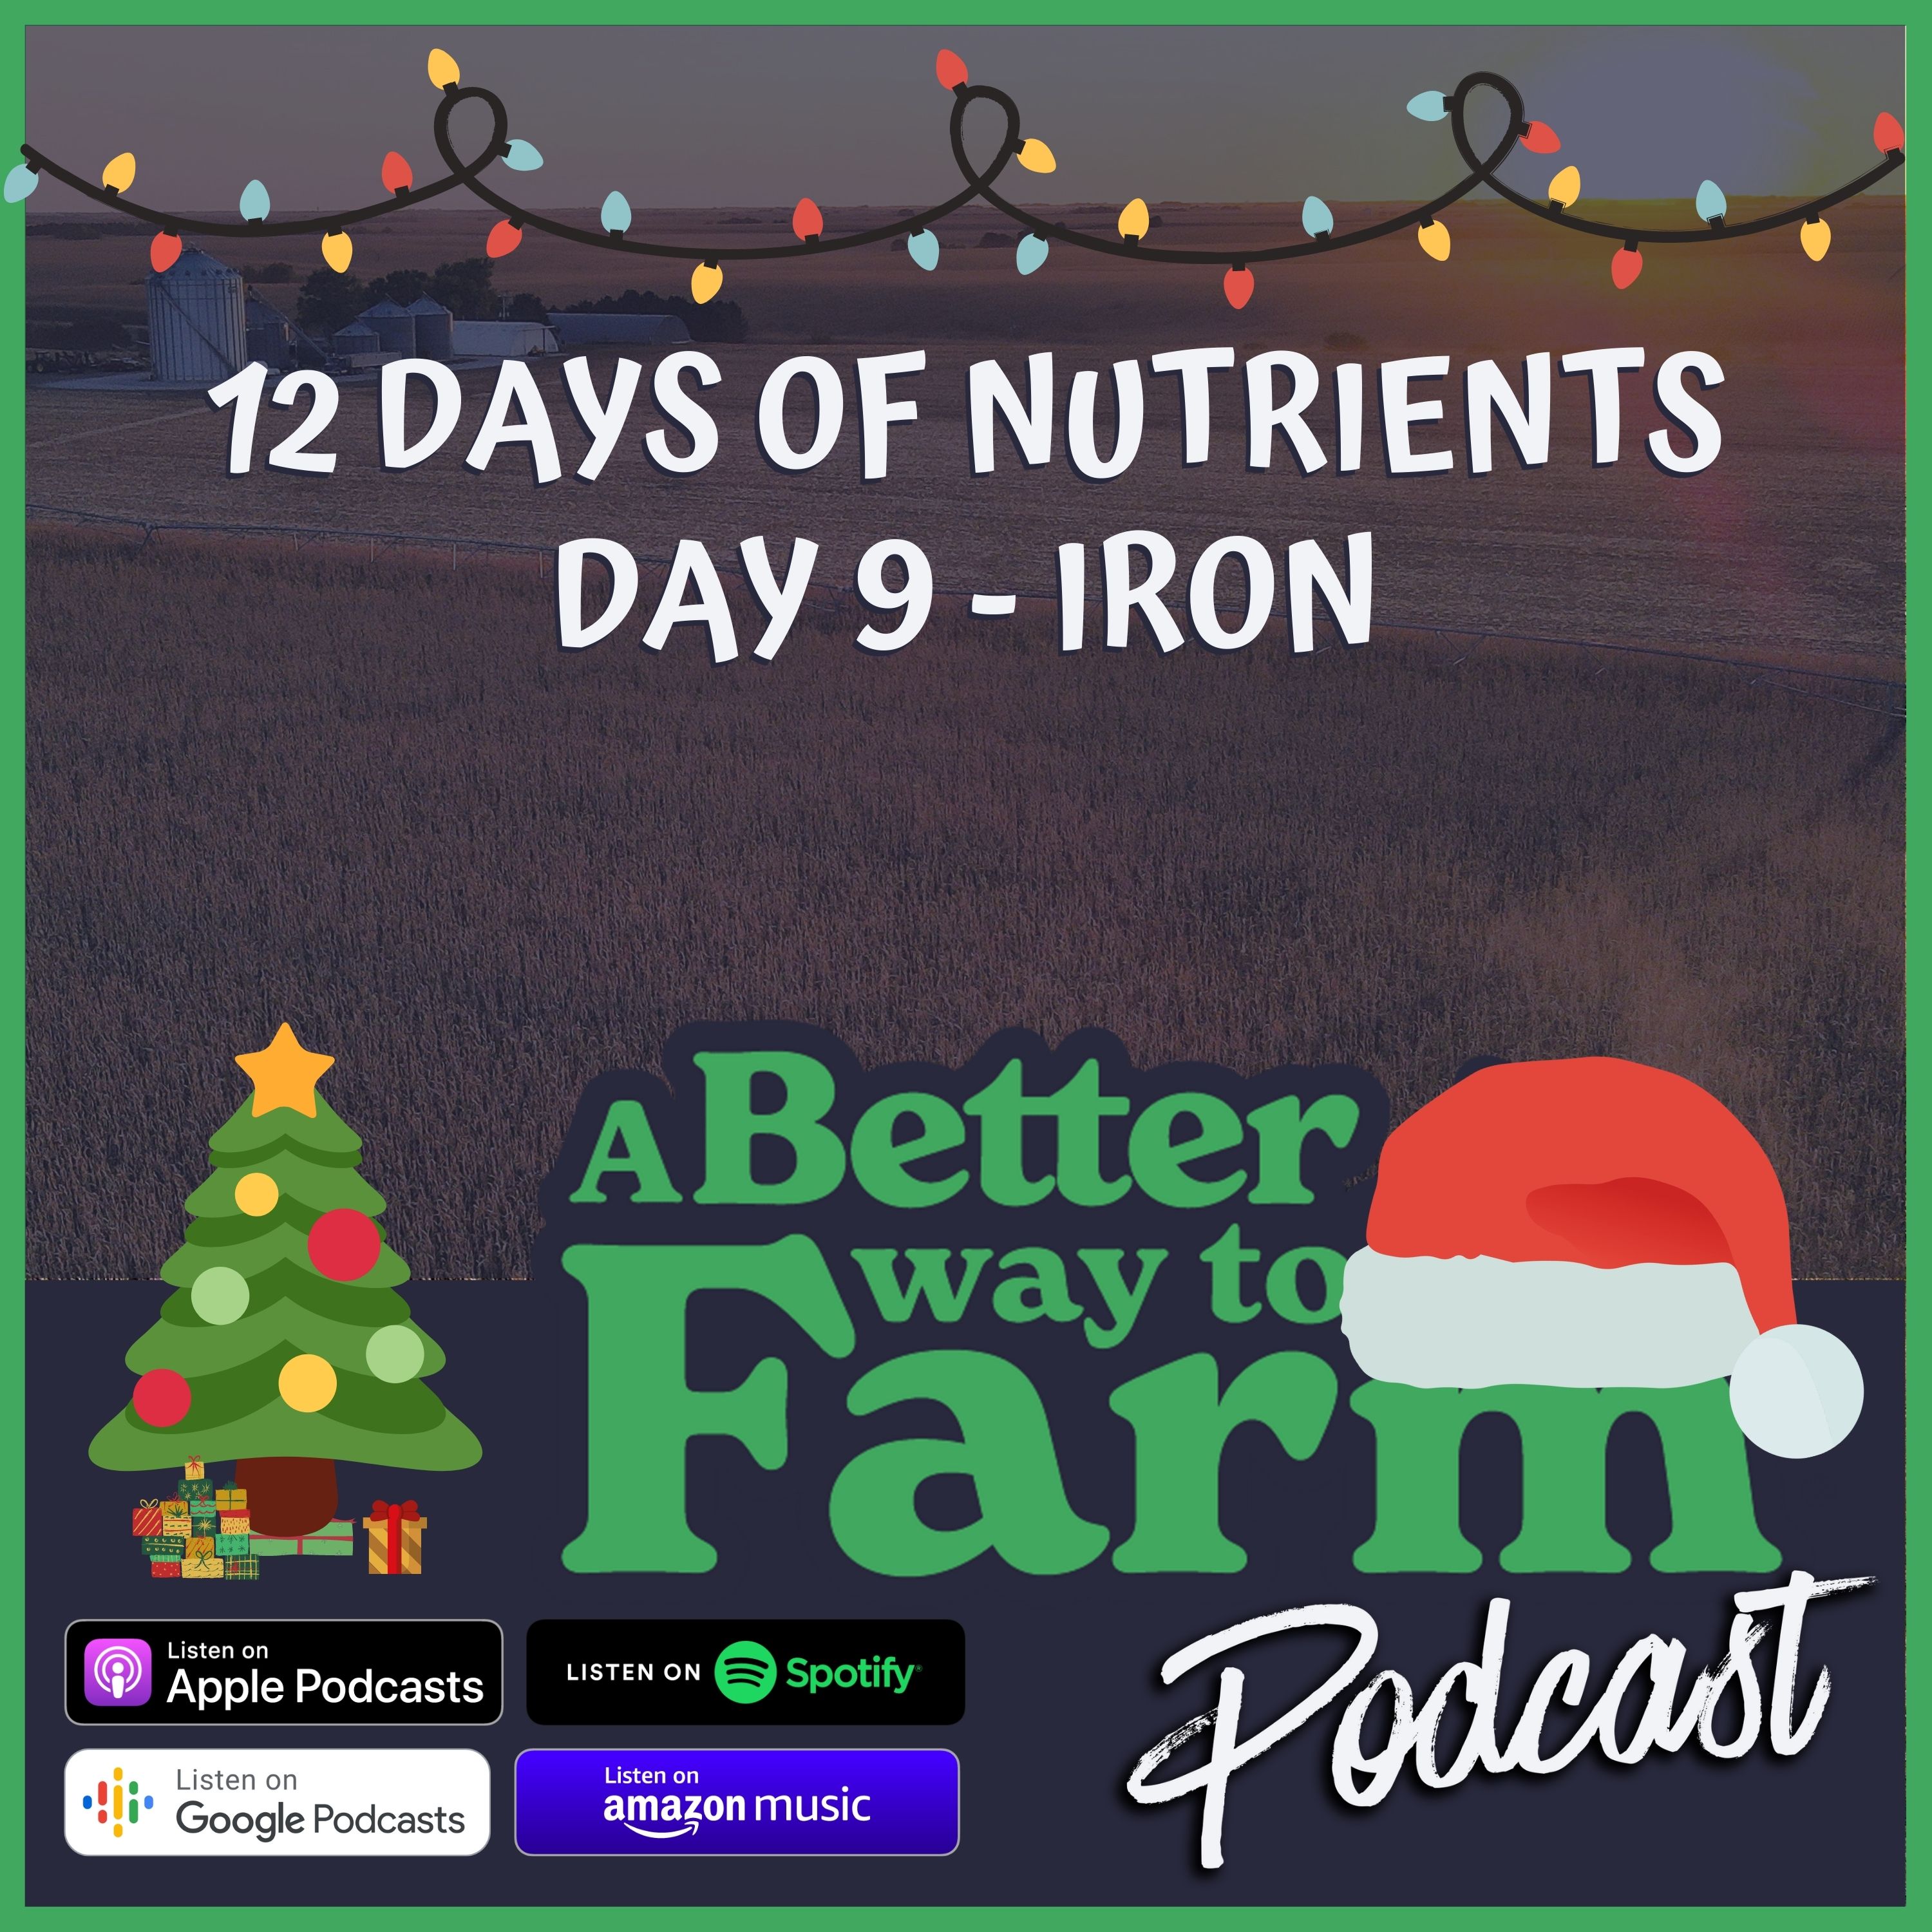 159: 12 Days of Nutrients - Day 9 Iron